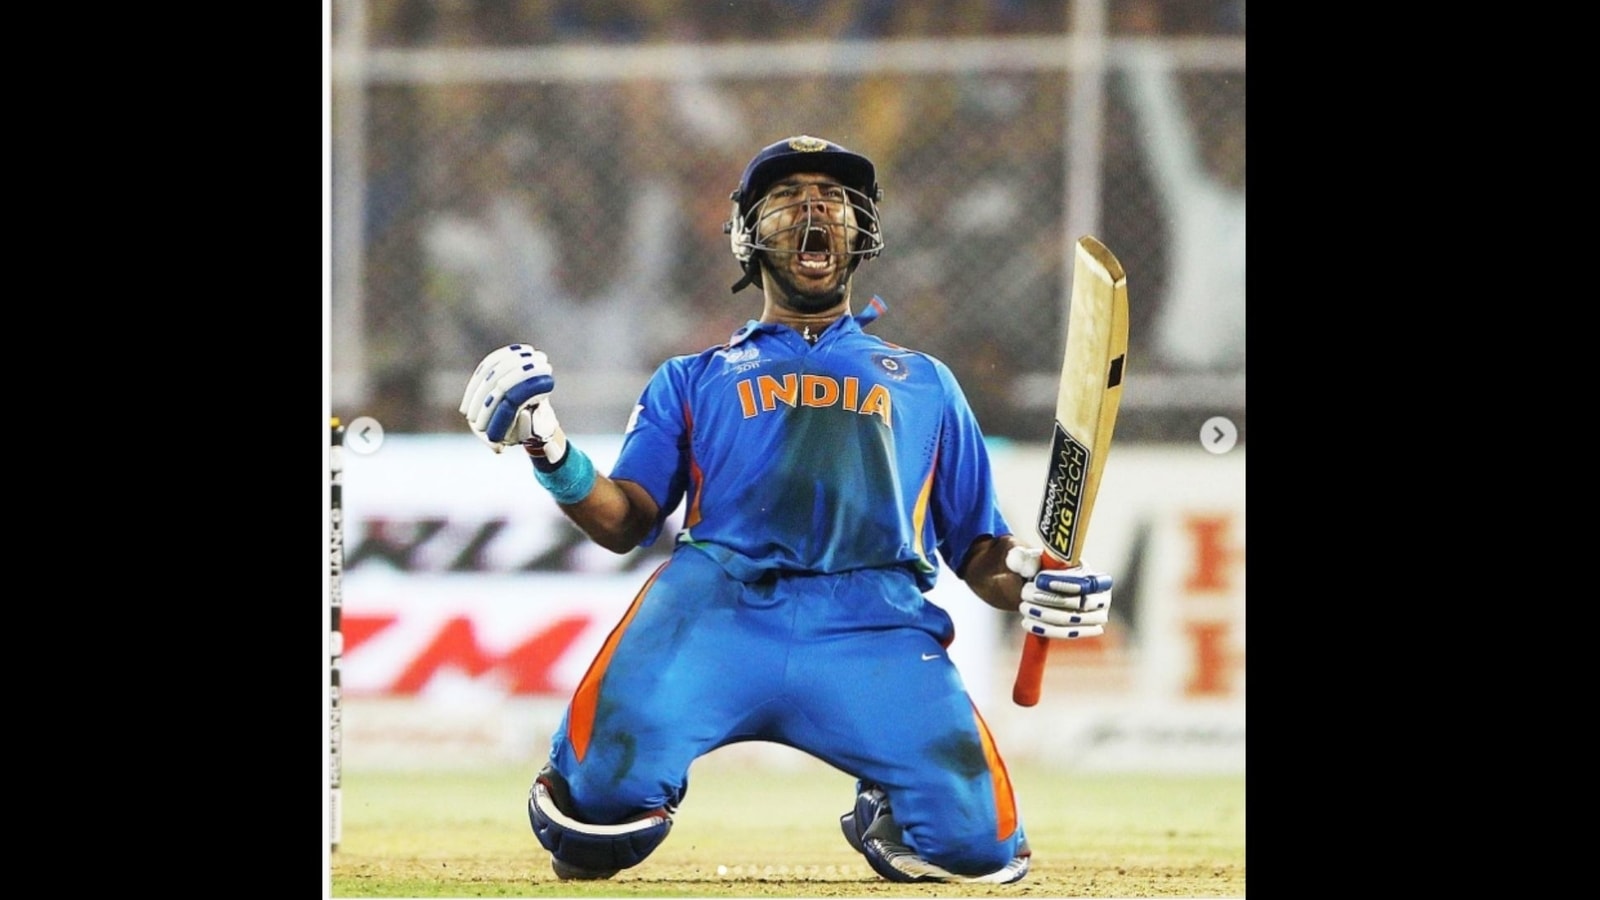 ICC Cricket World Cup Specials: Yuvraj Singh - India's man for the moment  in 2011 | Cricbuzz.com - Cricbuzz